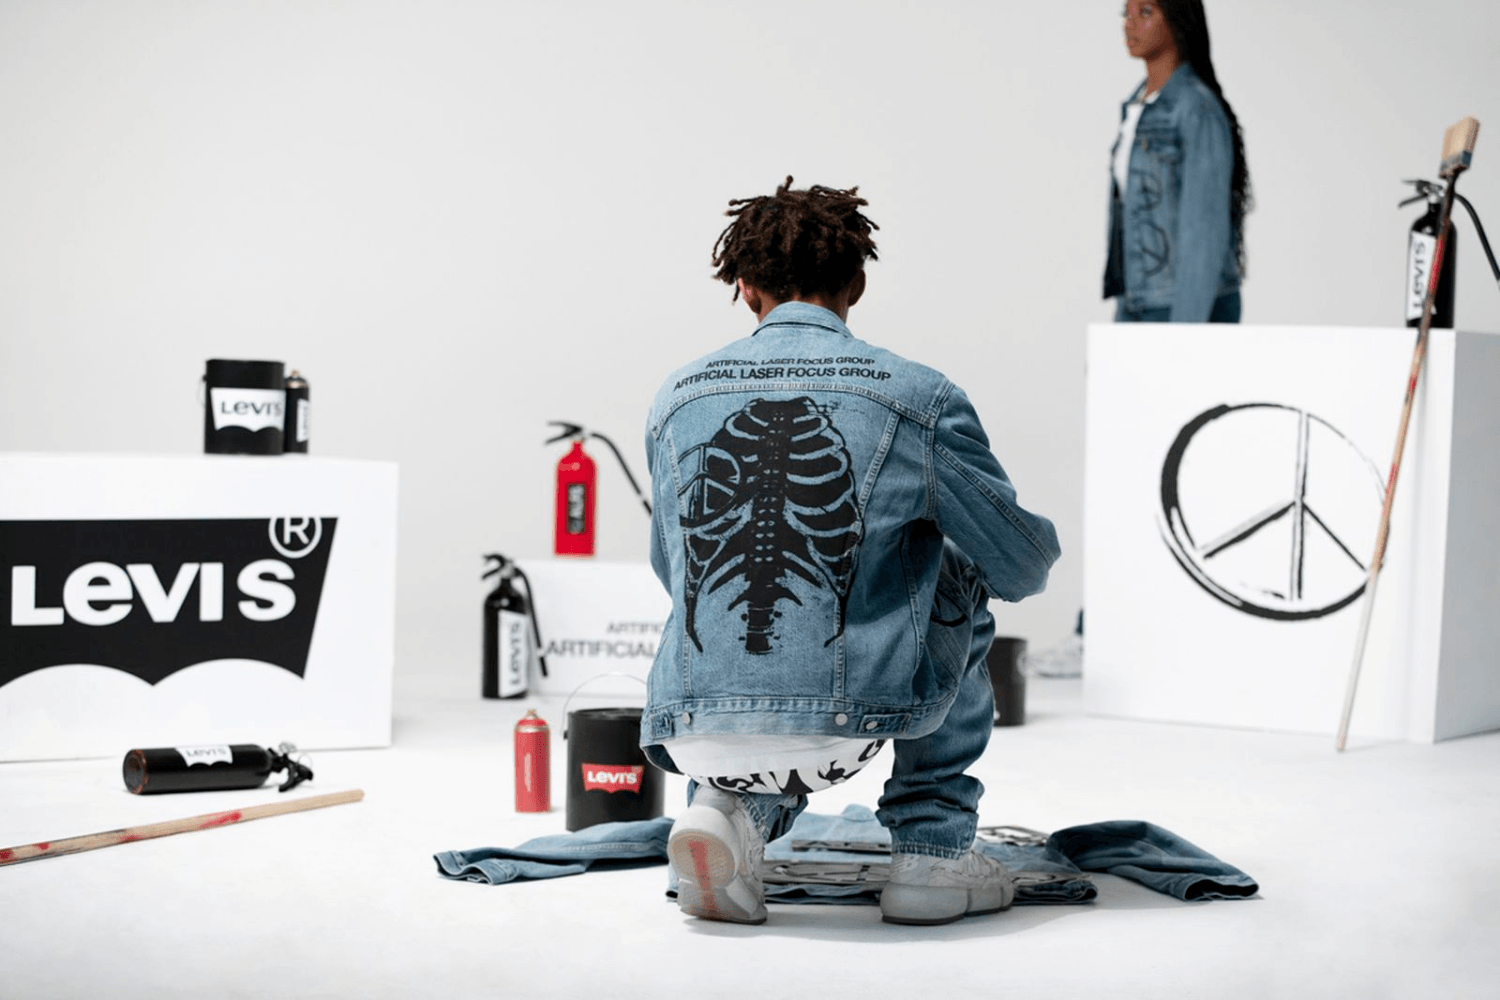 Levi's enters into collaboration with Jaden Smith